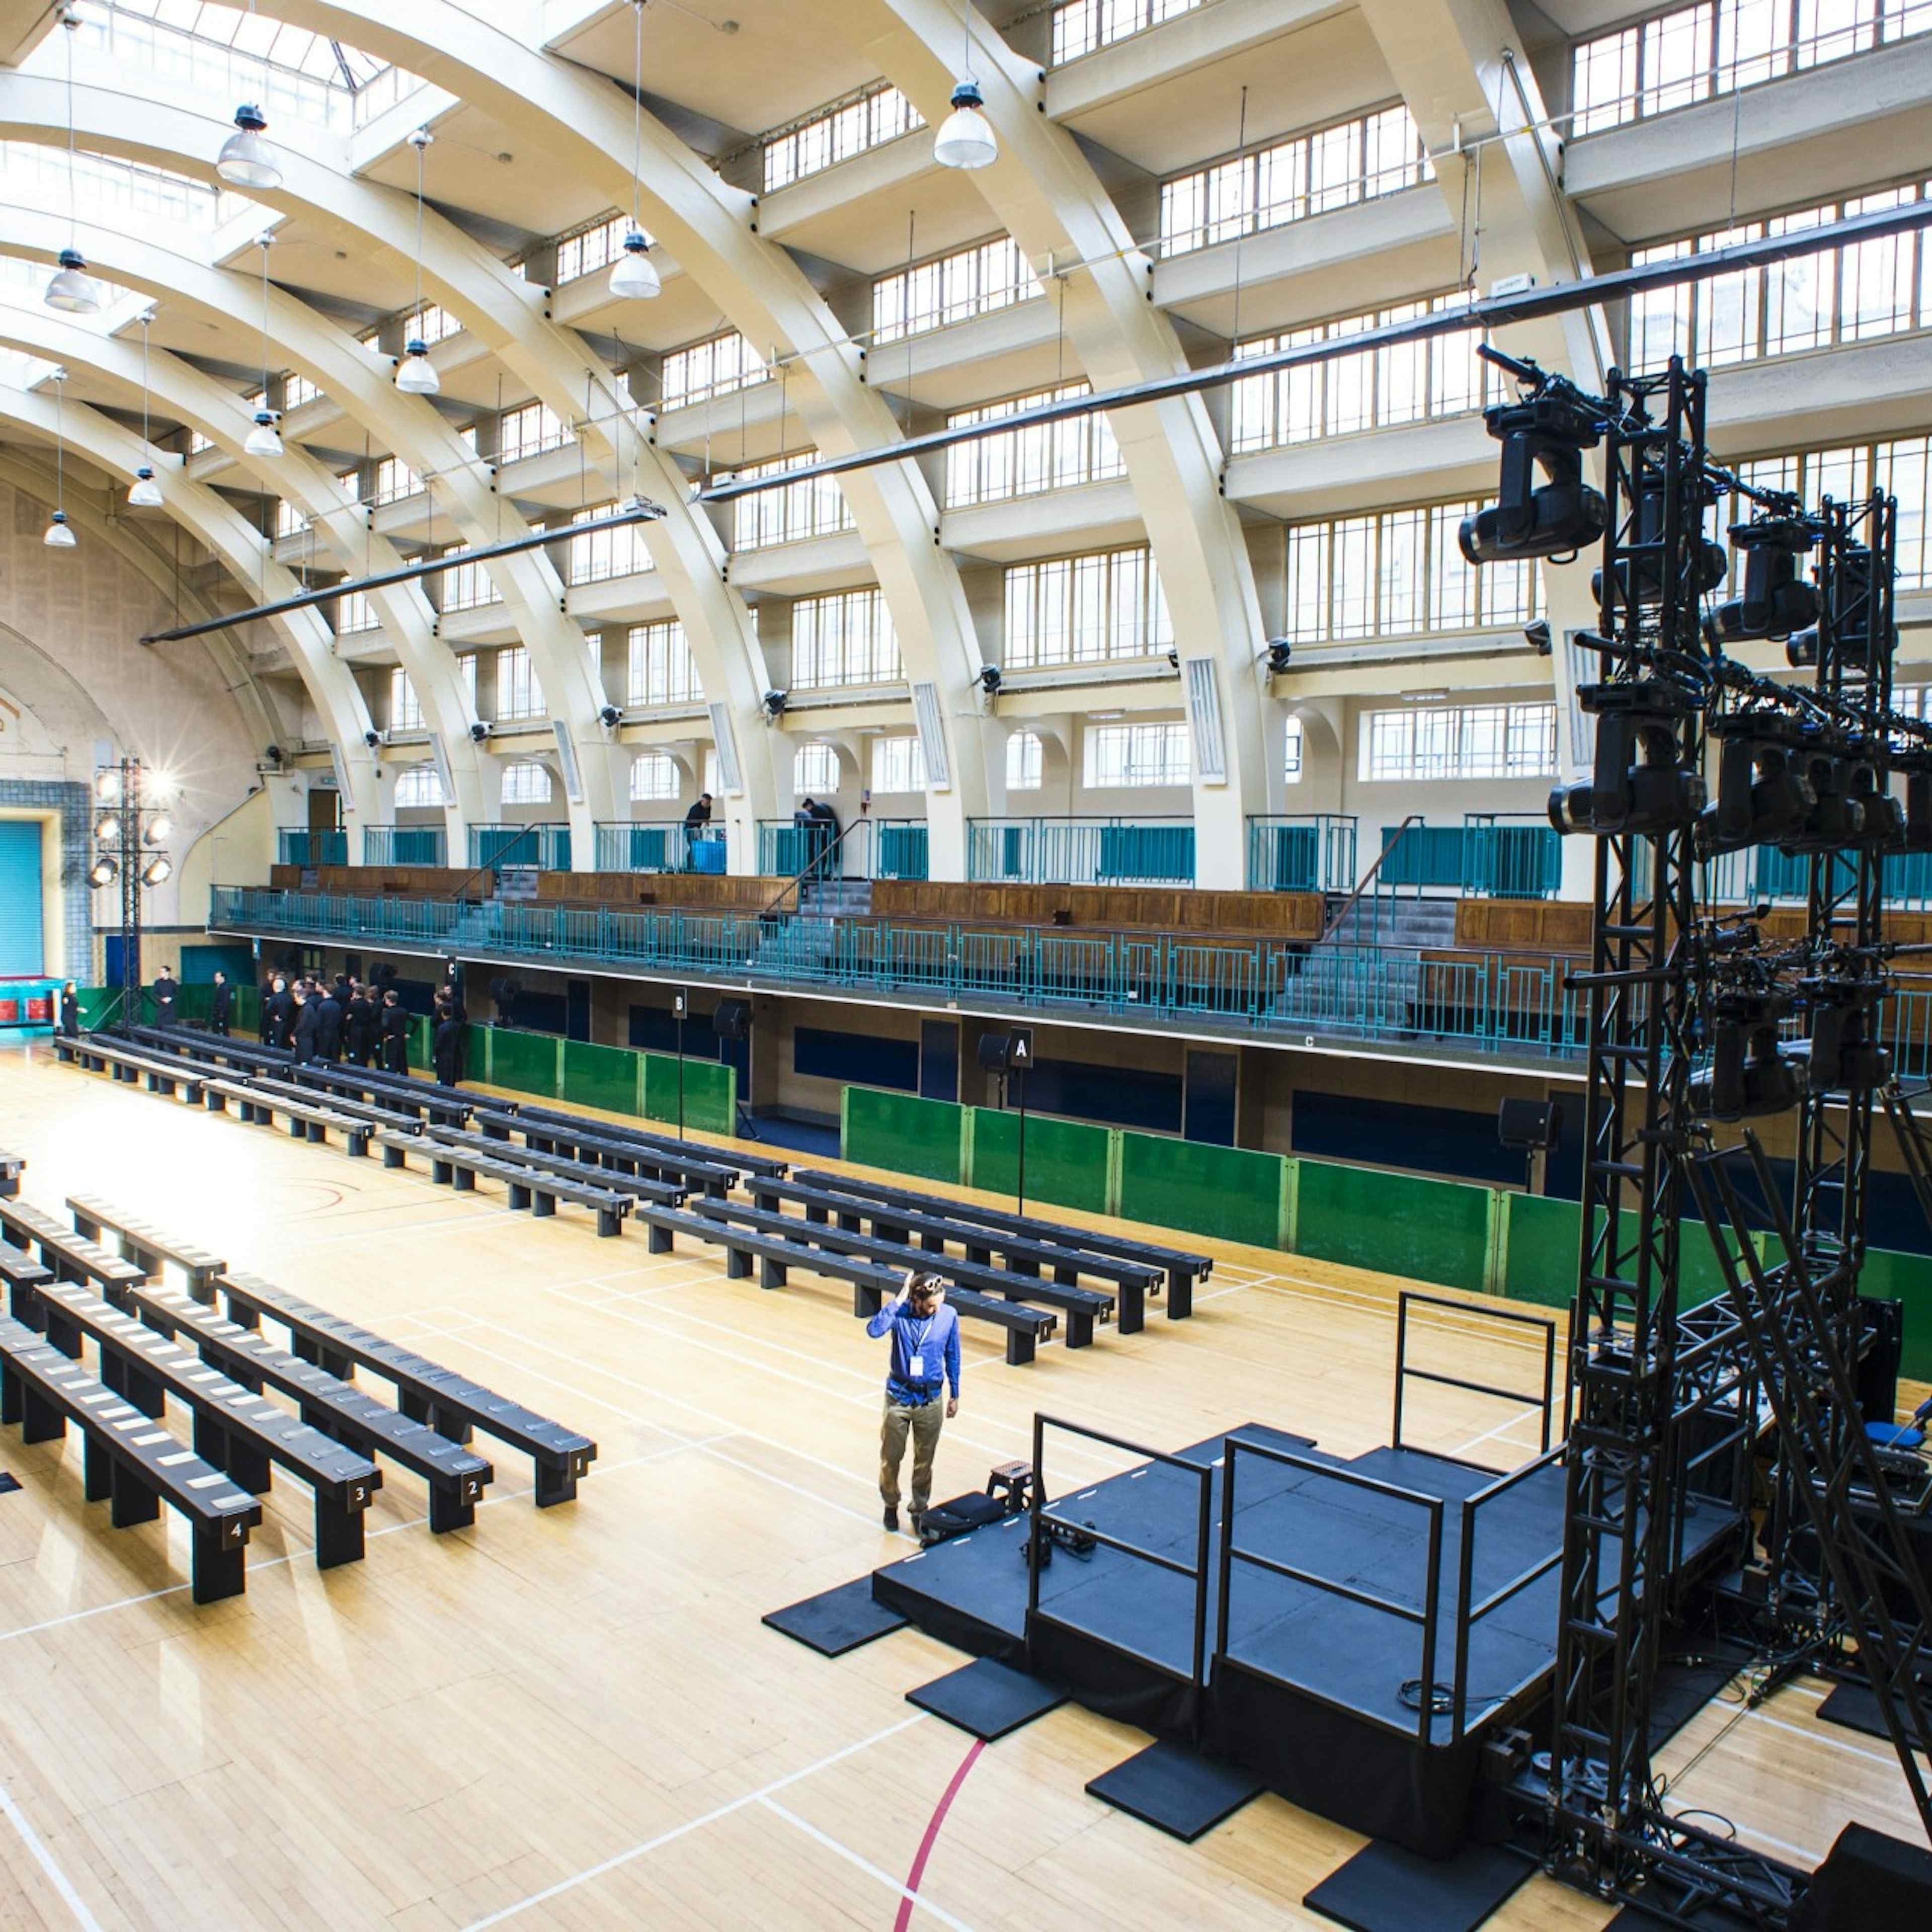 Seymour Leisure Centre - Grand Events Hall image 3